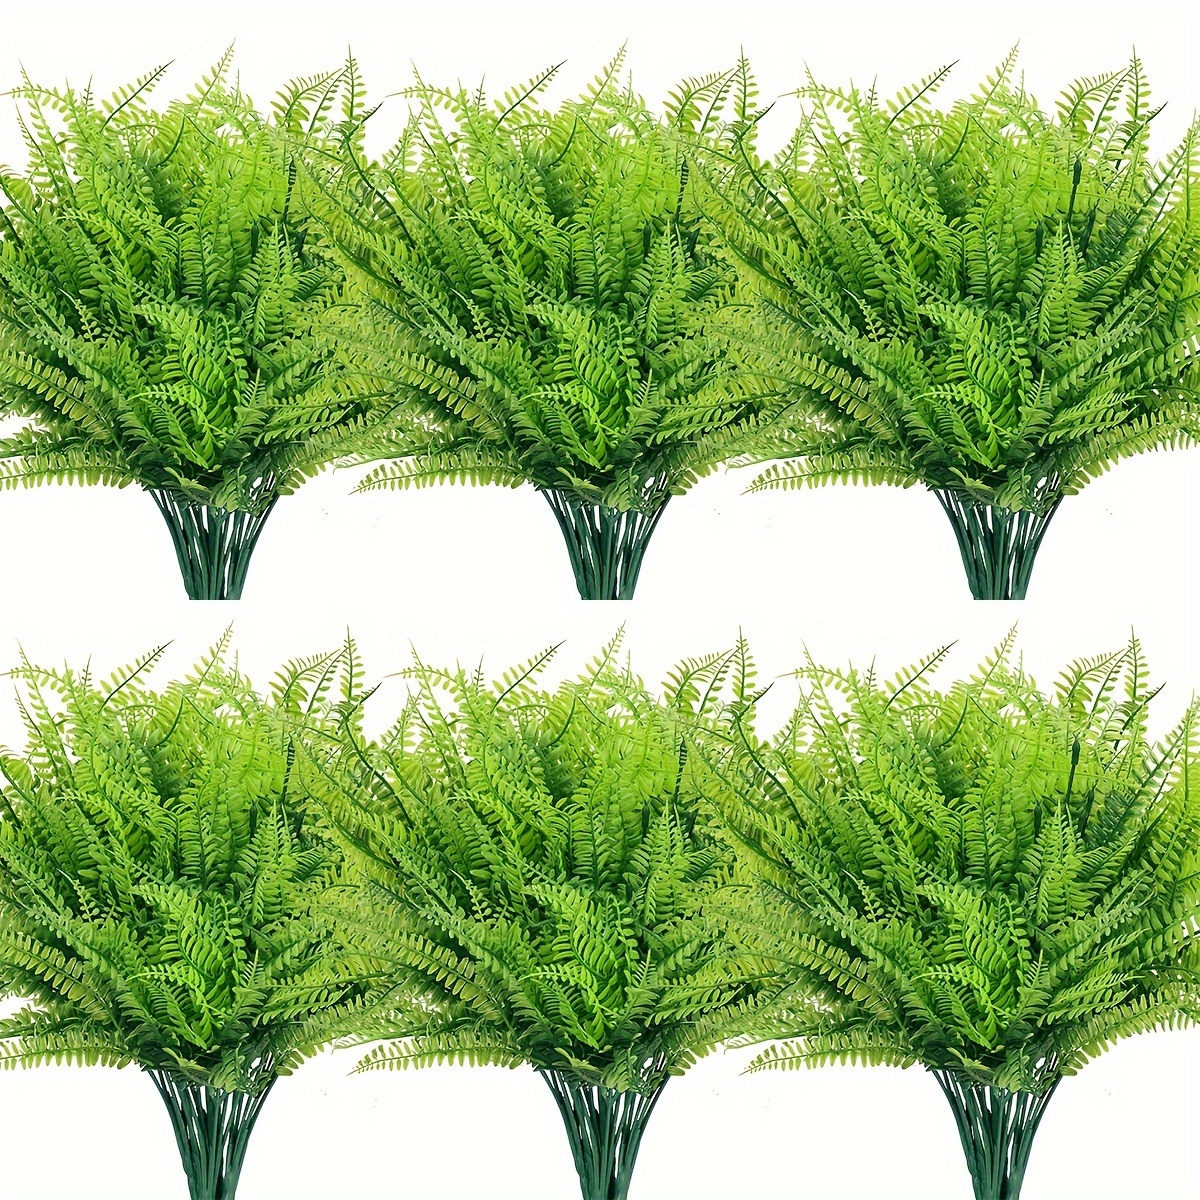 

10 Bundles Artificial Ferns Uv Resistant Greenery Plants Faux Plastic Plants Shrubs For Garden Front Porch Window Box Home Office Indoor Outdoor Decoration